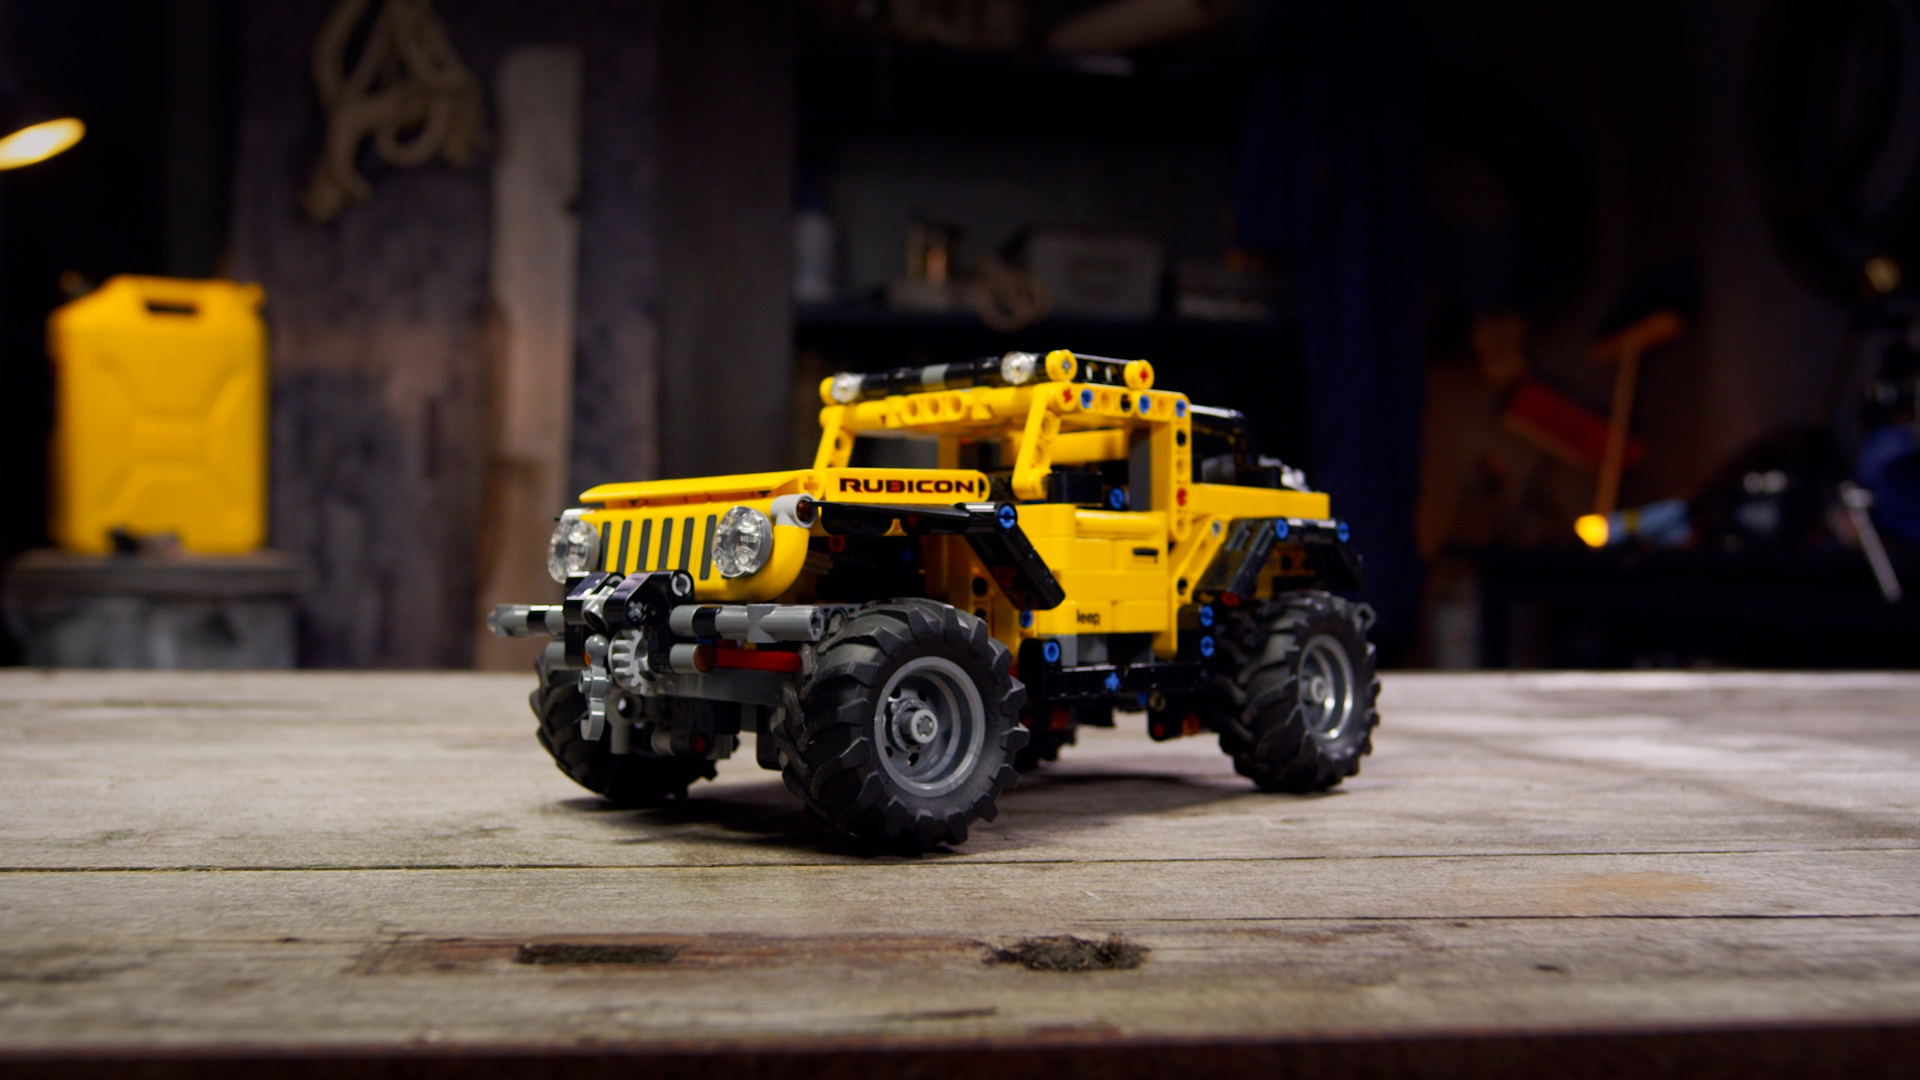 LEGO Technic Jeep Wrangler makes a great addition to any